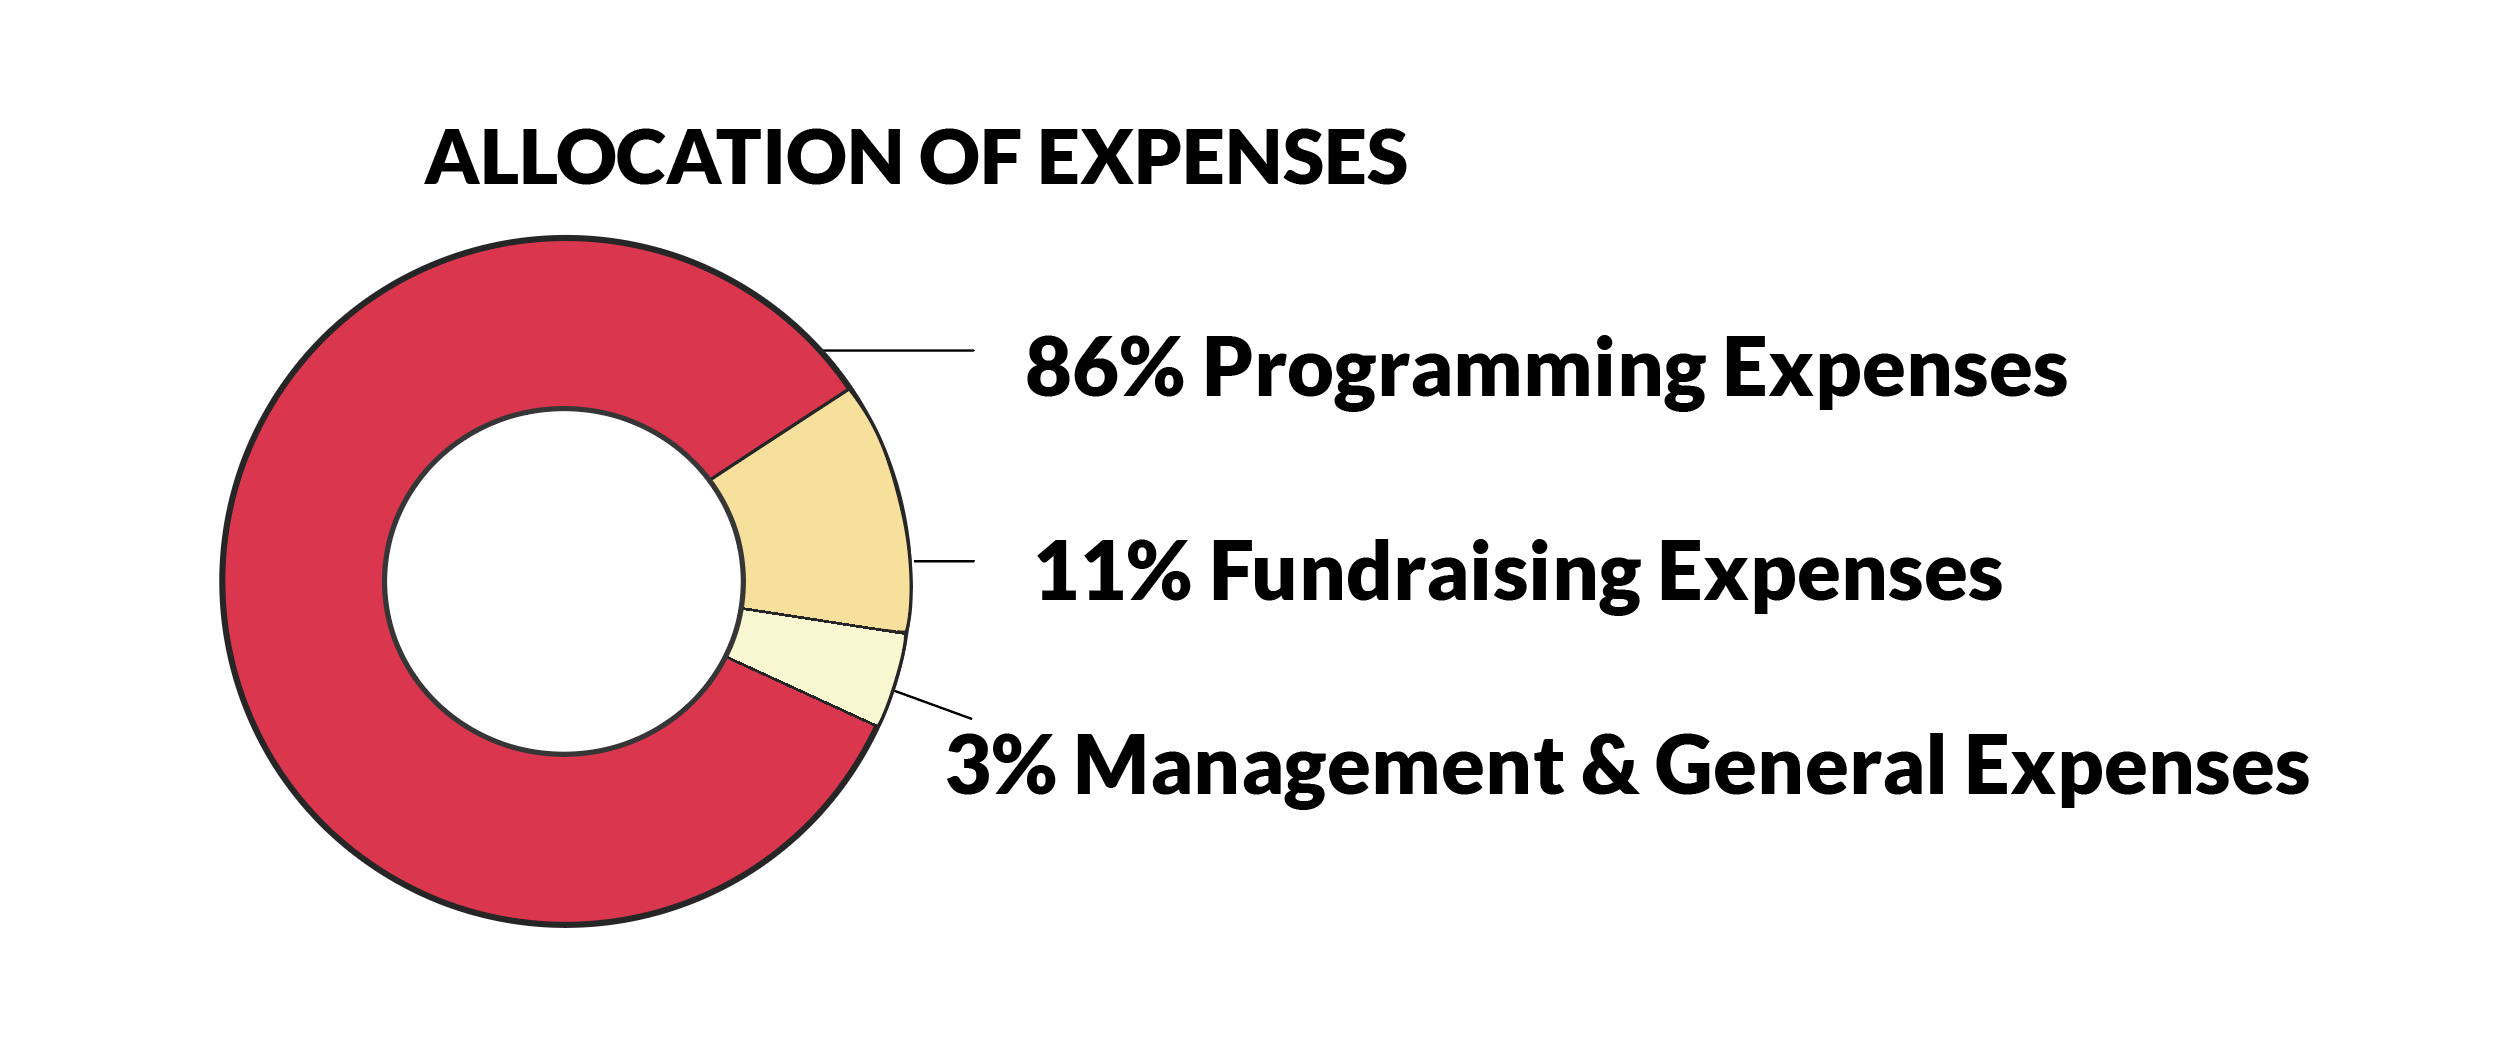 A graph showing allocation of expenses